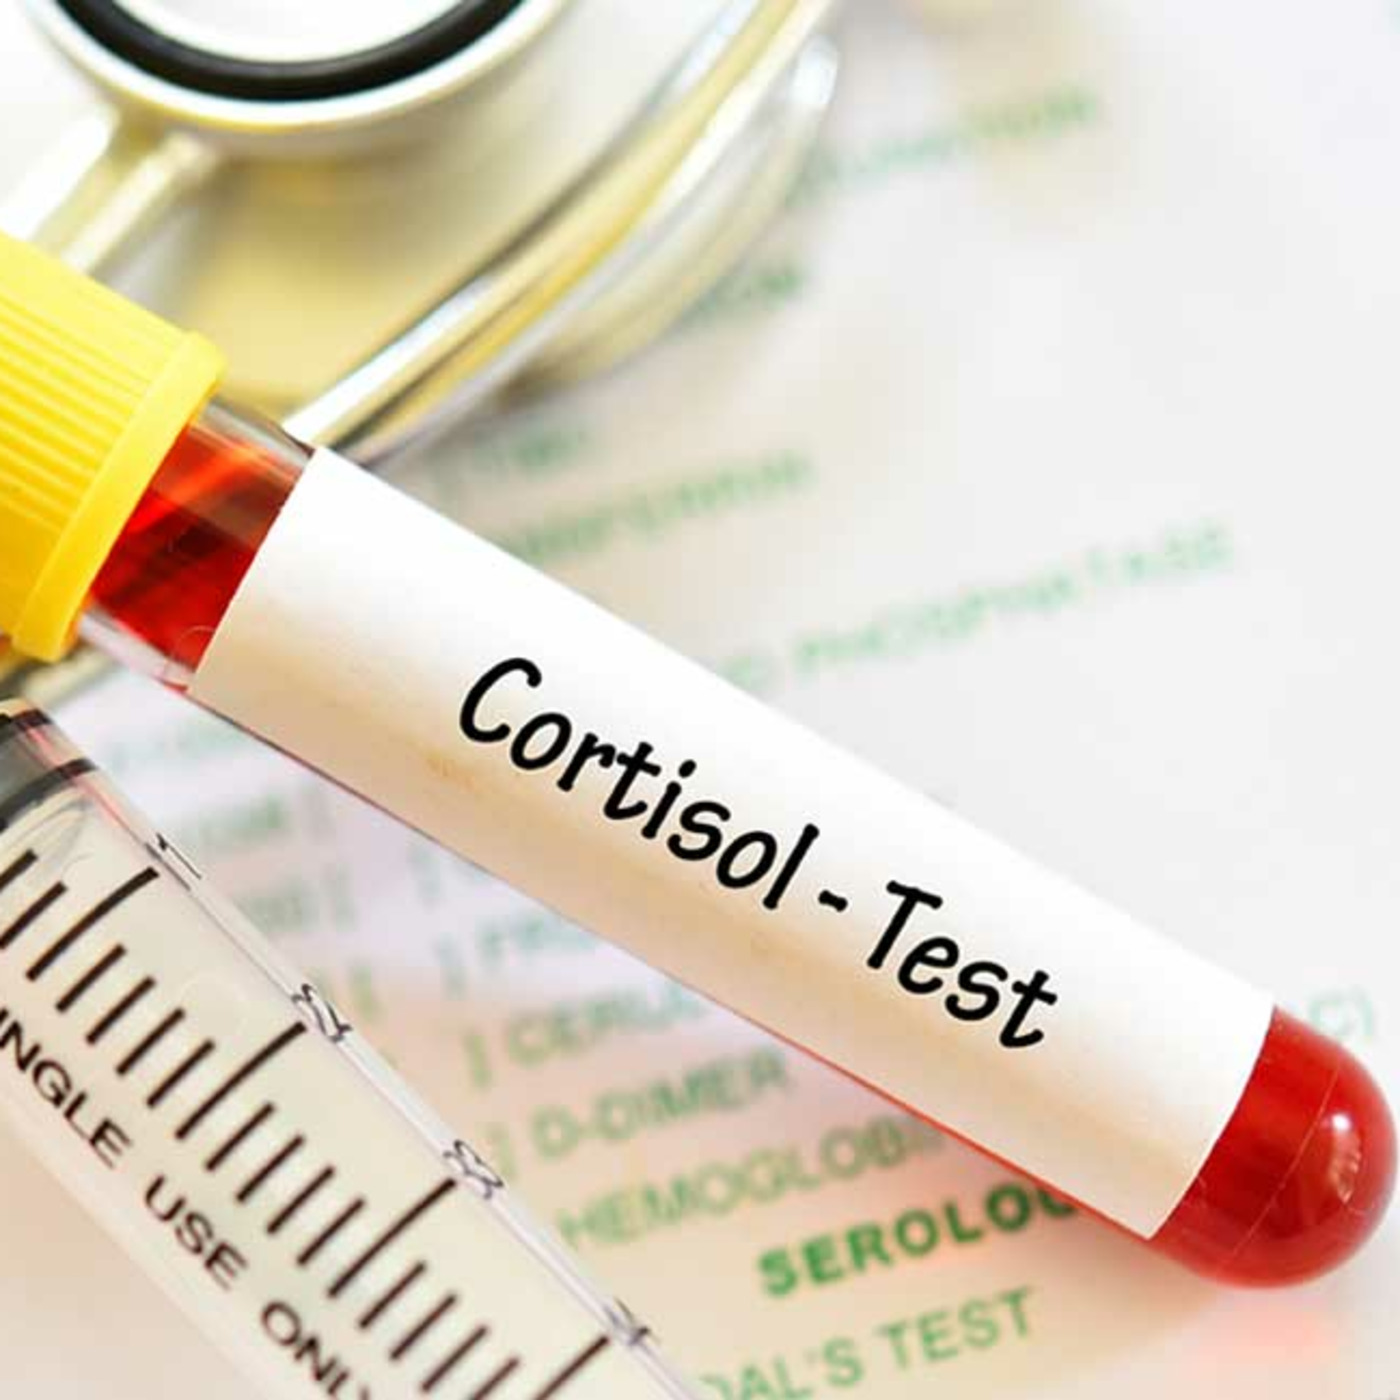 Episode 114: Adrenal Function Tests - Understanding Your Blood Test Results